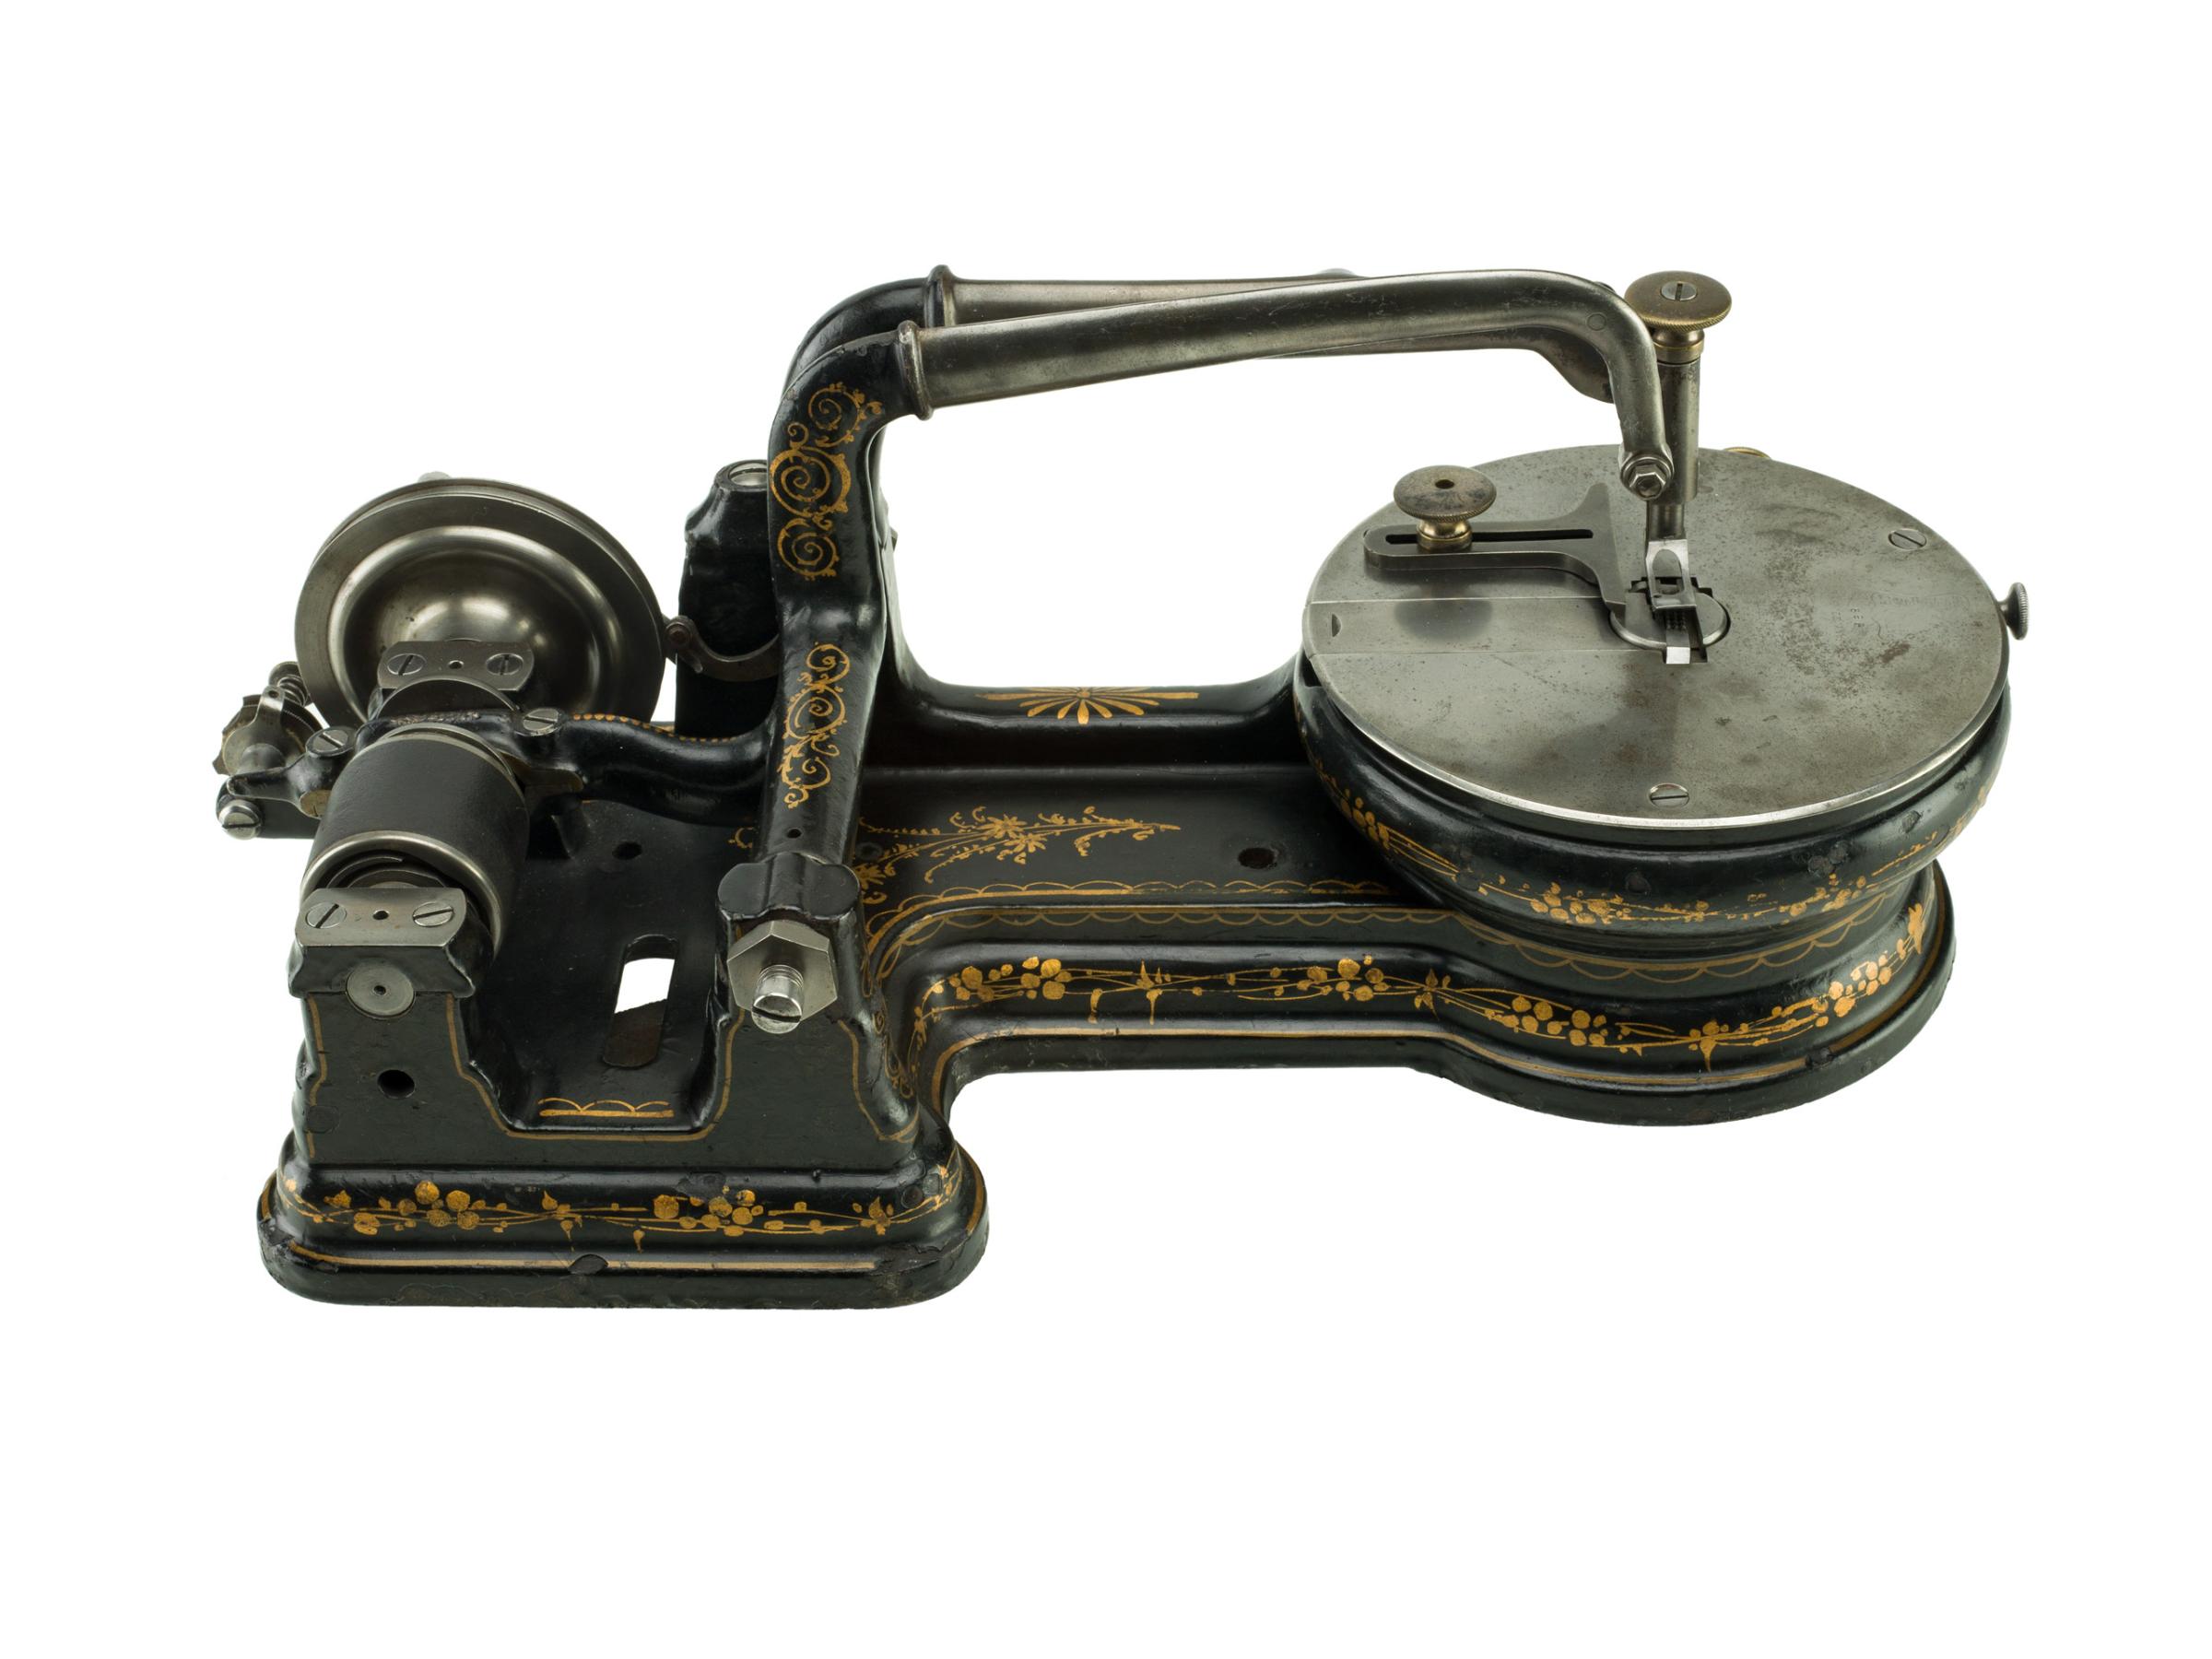 Sewing Machine, 1873: Helen Blanchard, (Patent No. 141987) This patent model for an improvement in sewing machines introduced the buttonhole stitch. Blanchard received some 28 patents, many having to do with sewing. She is best remembered for another overstitch sewing invention, the “zigzag.”